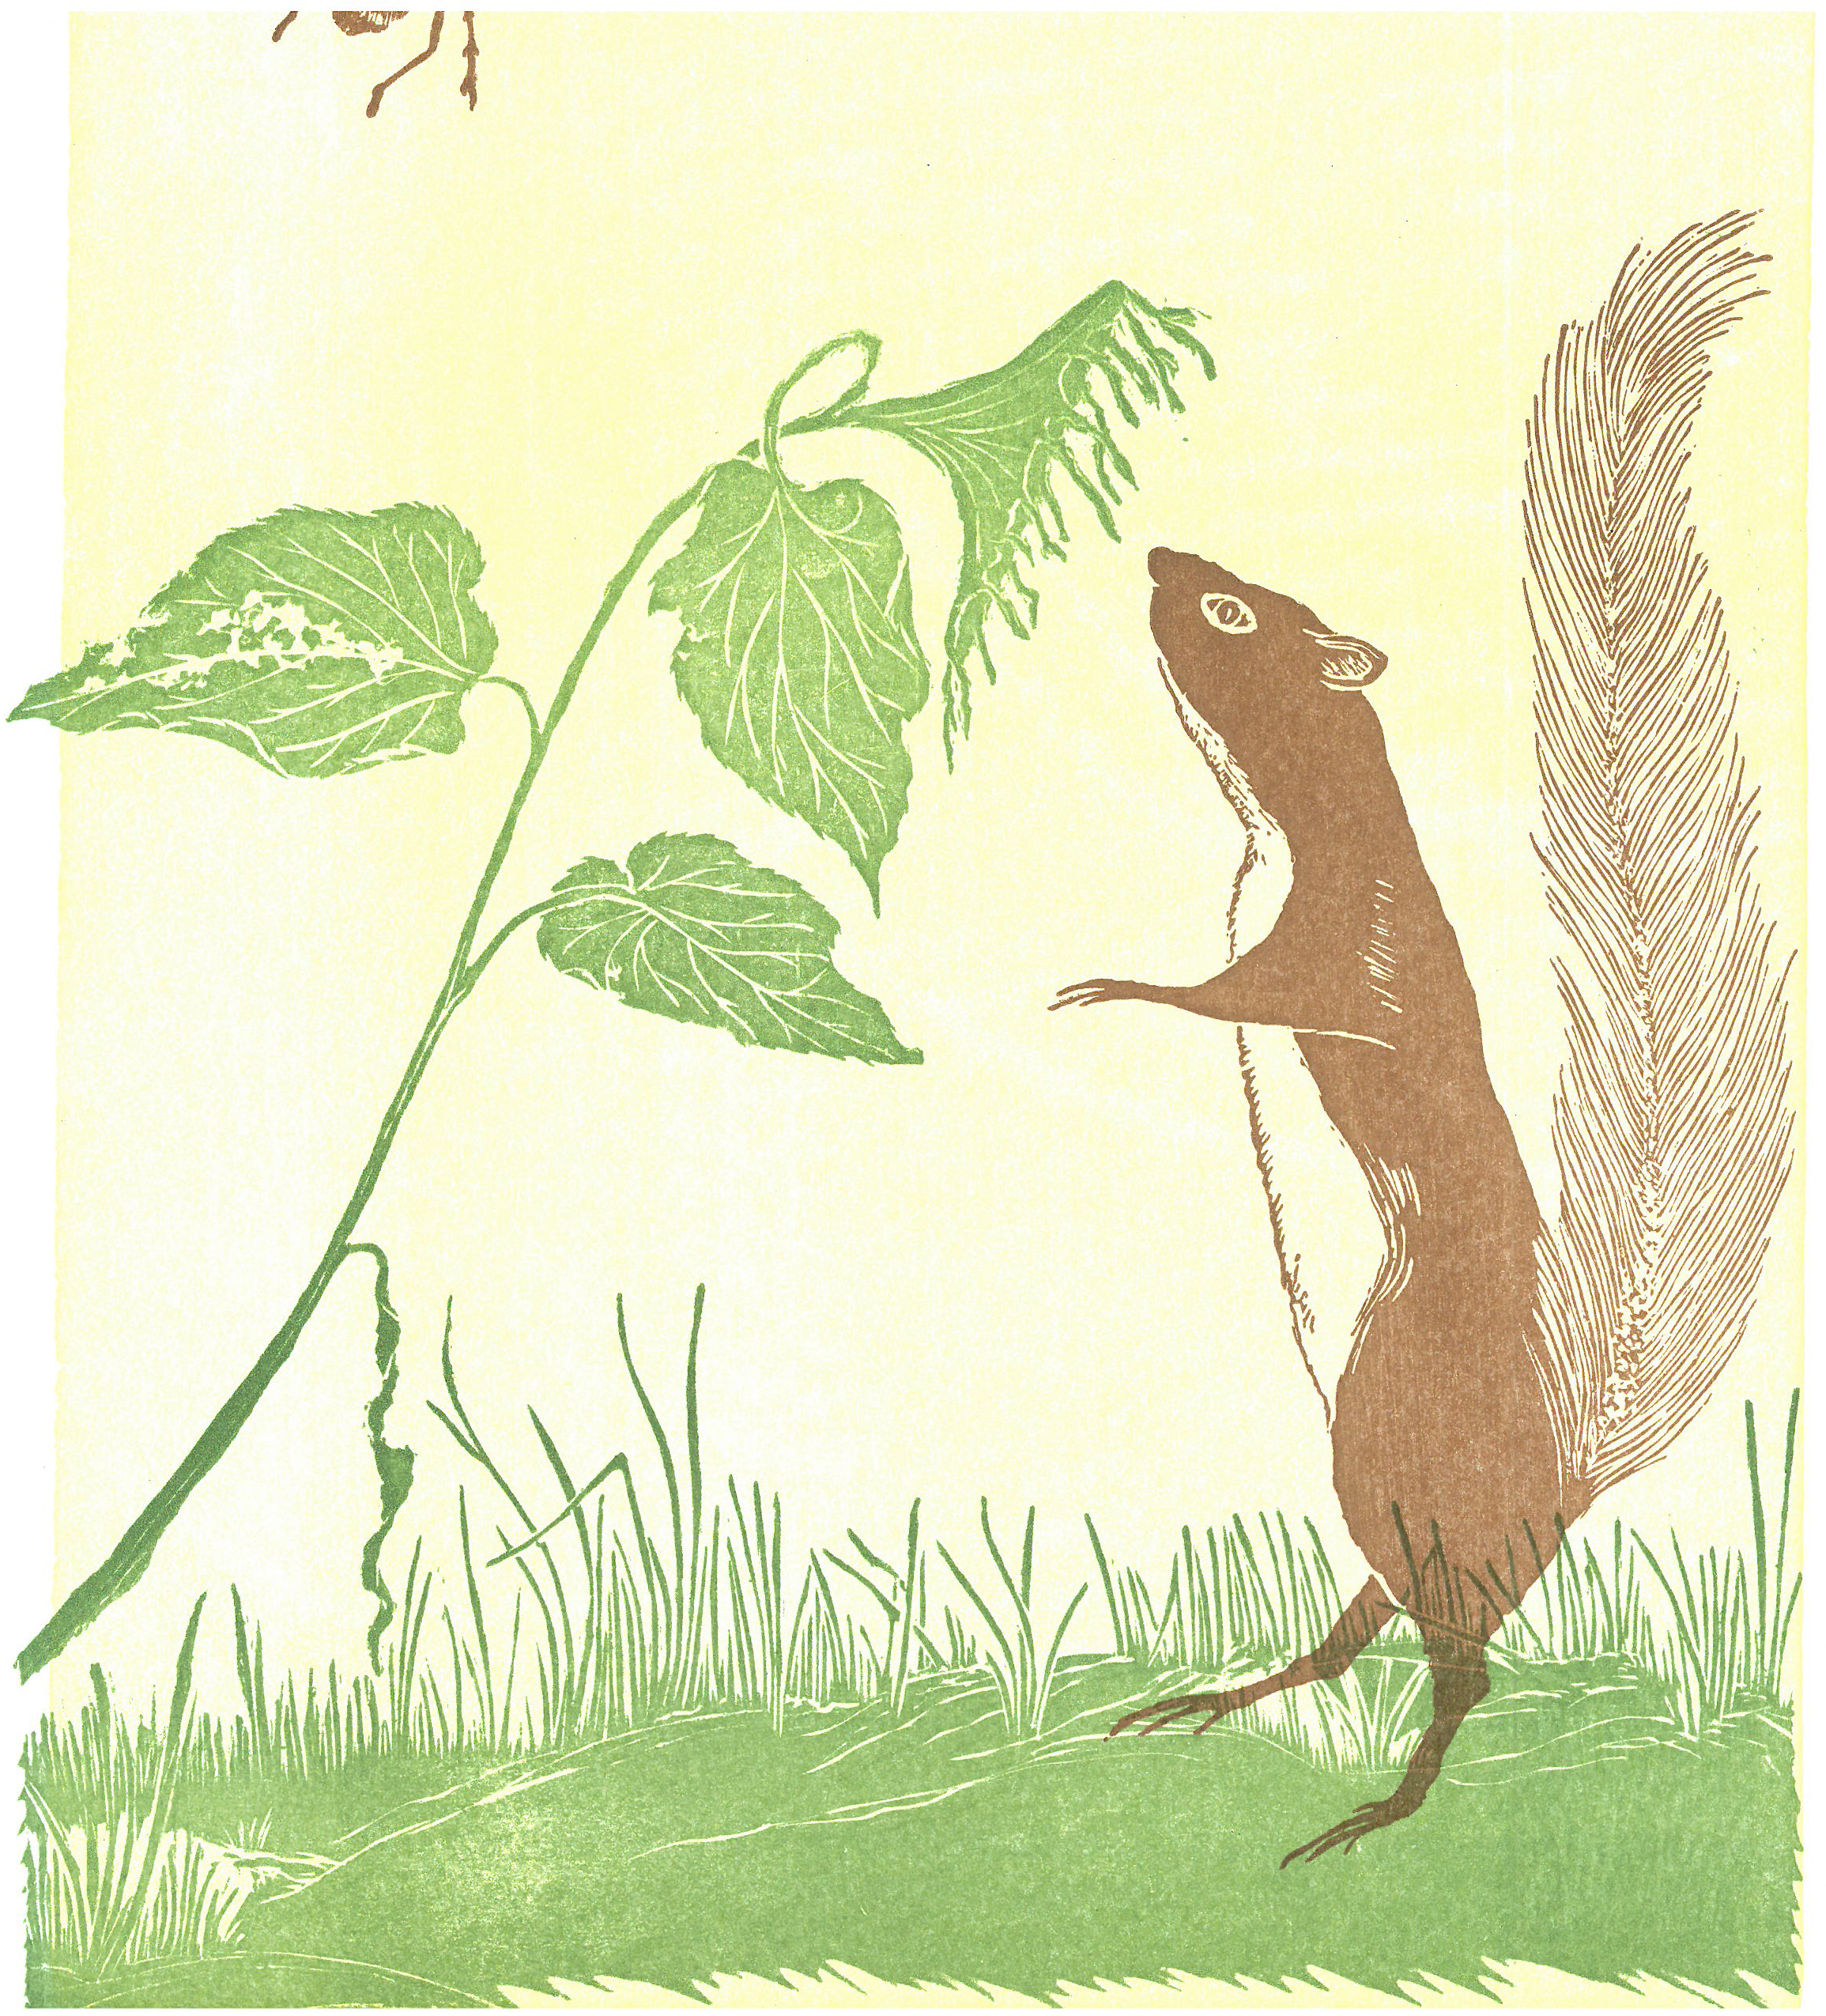 An illustrated print with a pale yellow background, soft grass with two skinny leaves, and a brown squirrel standing on his hind paws on the right side of the image.